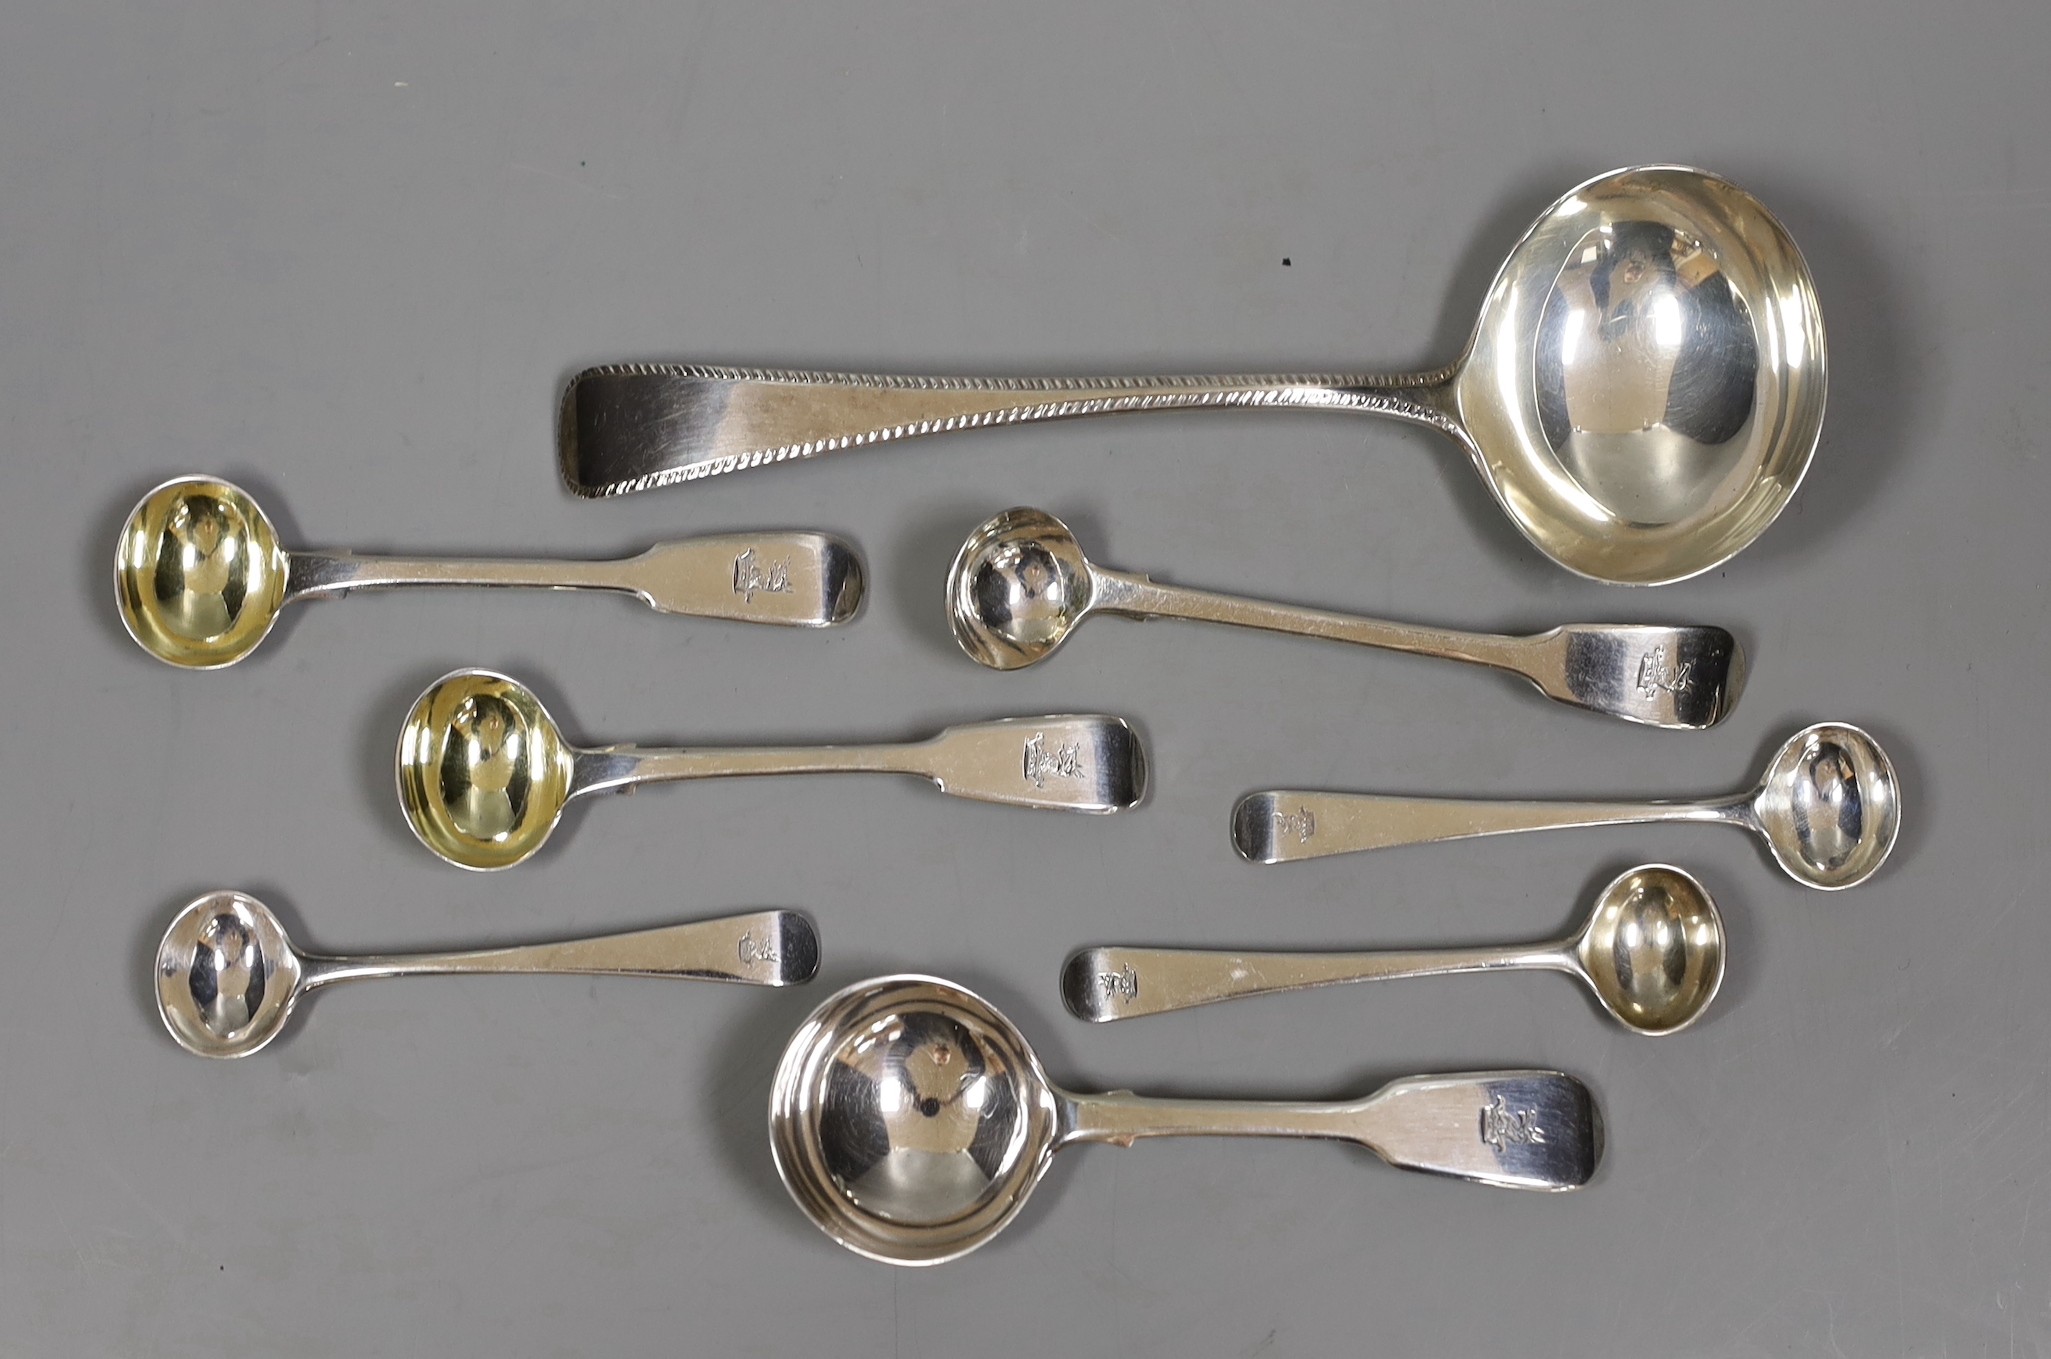 A composite set of six George III Old English pattern and fiddle pattern spoons for condiments, a William IV silver caddy spoons and a Victorian silver sauce ladle, 5.2oz